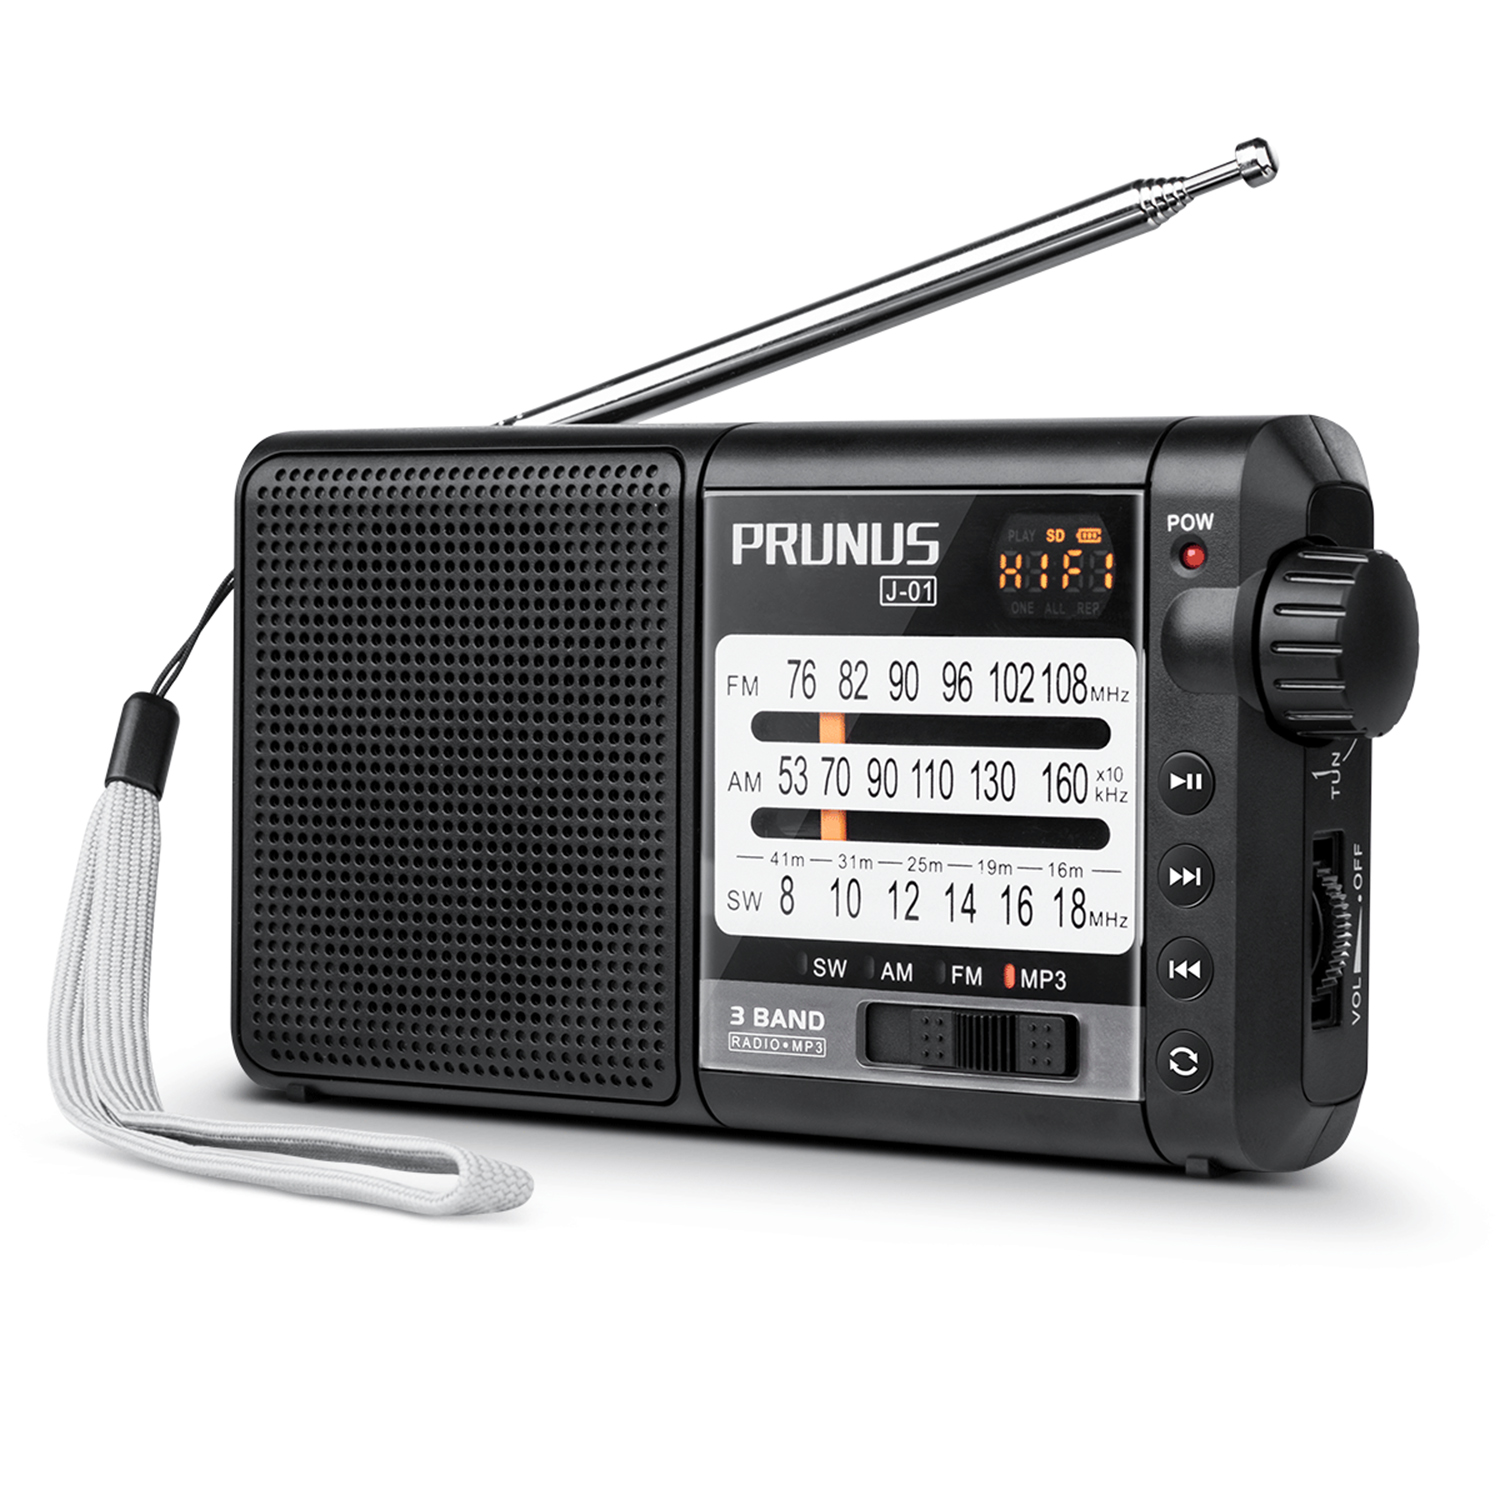 PRUNUS J-01 Transistor Radio Portable Excellent Reception, Battery Radio Supports SD Card MP3, Portable Radio with 2200mah Large Rechargeable and Replaceable Battery.